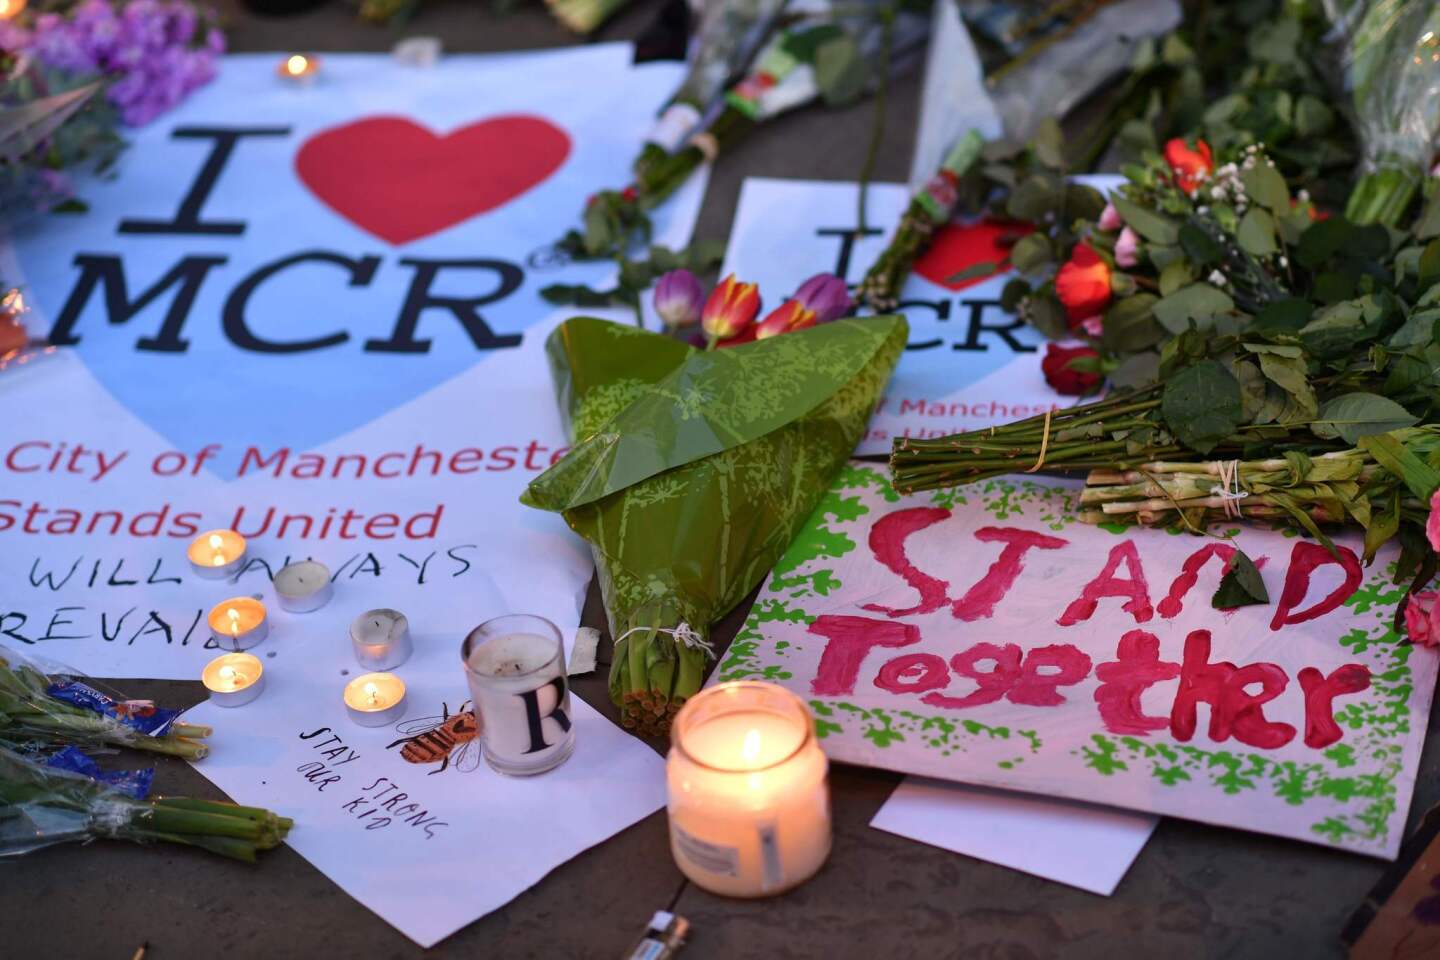 Messages of unity at Manchester's Albert Square on Tuesday, the day after the deadly attack at a pop concert.